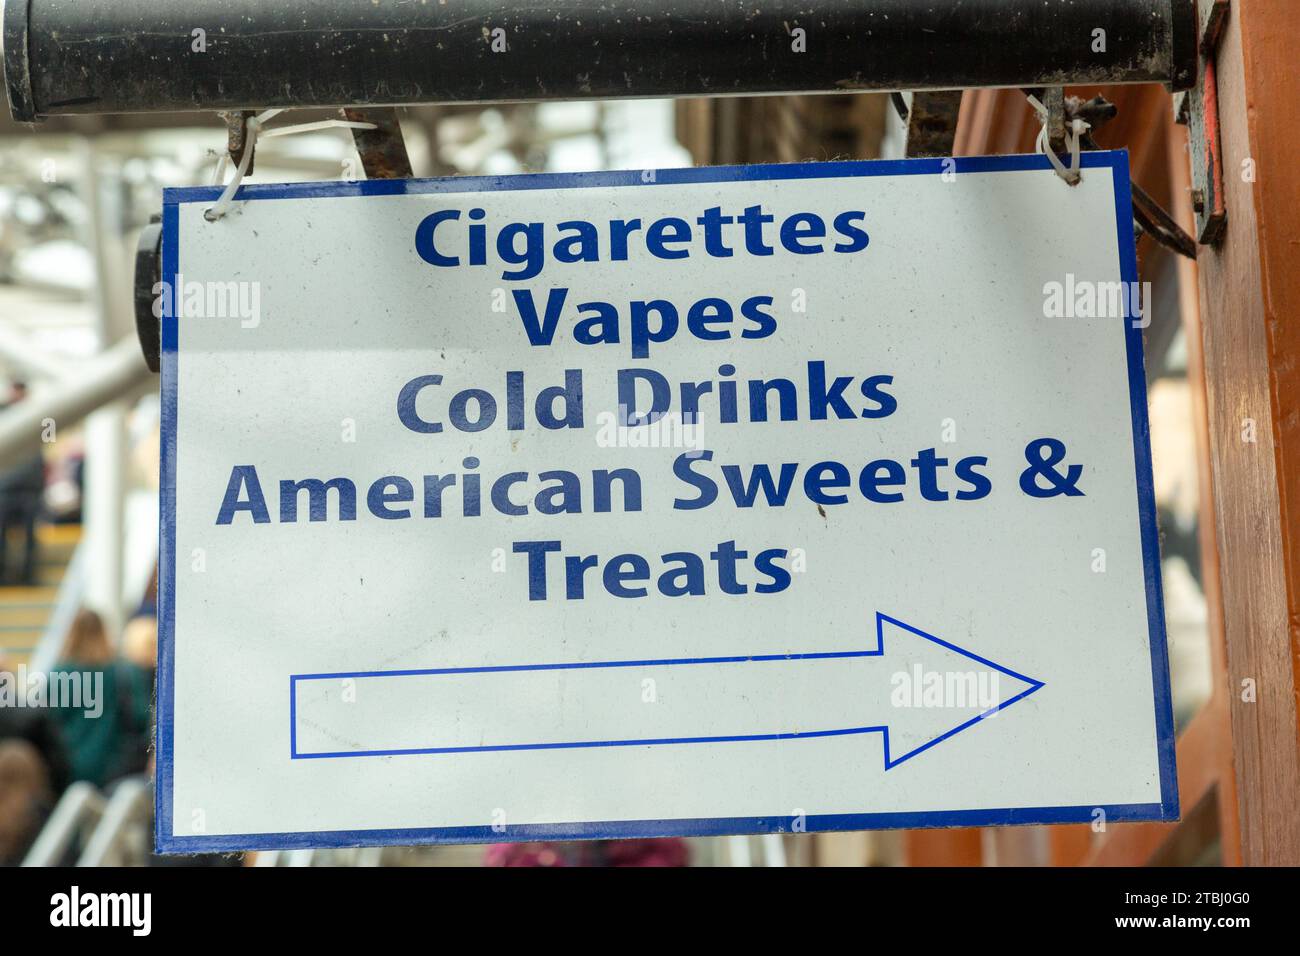 A sign saying Cigarettes Vapes Cold Drinks American Sweets & Treats Stock Photo